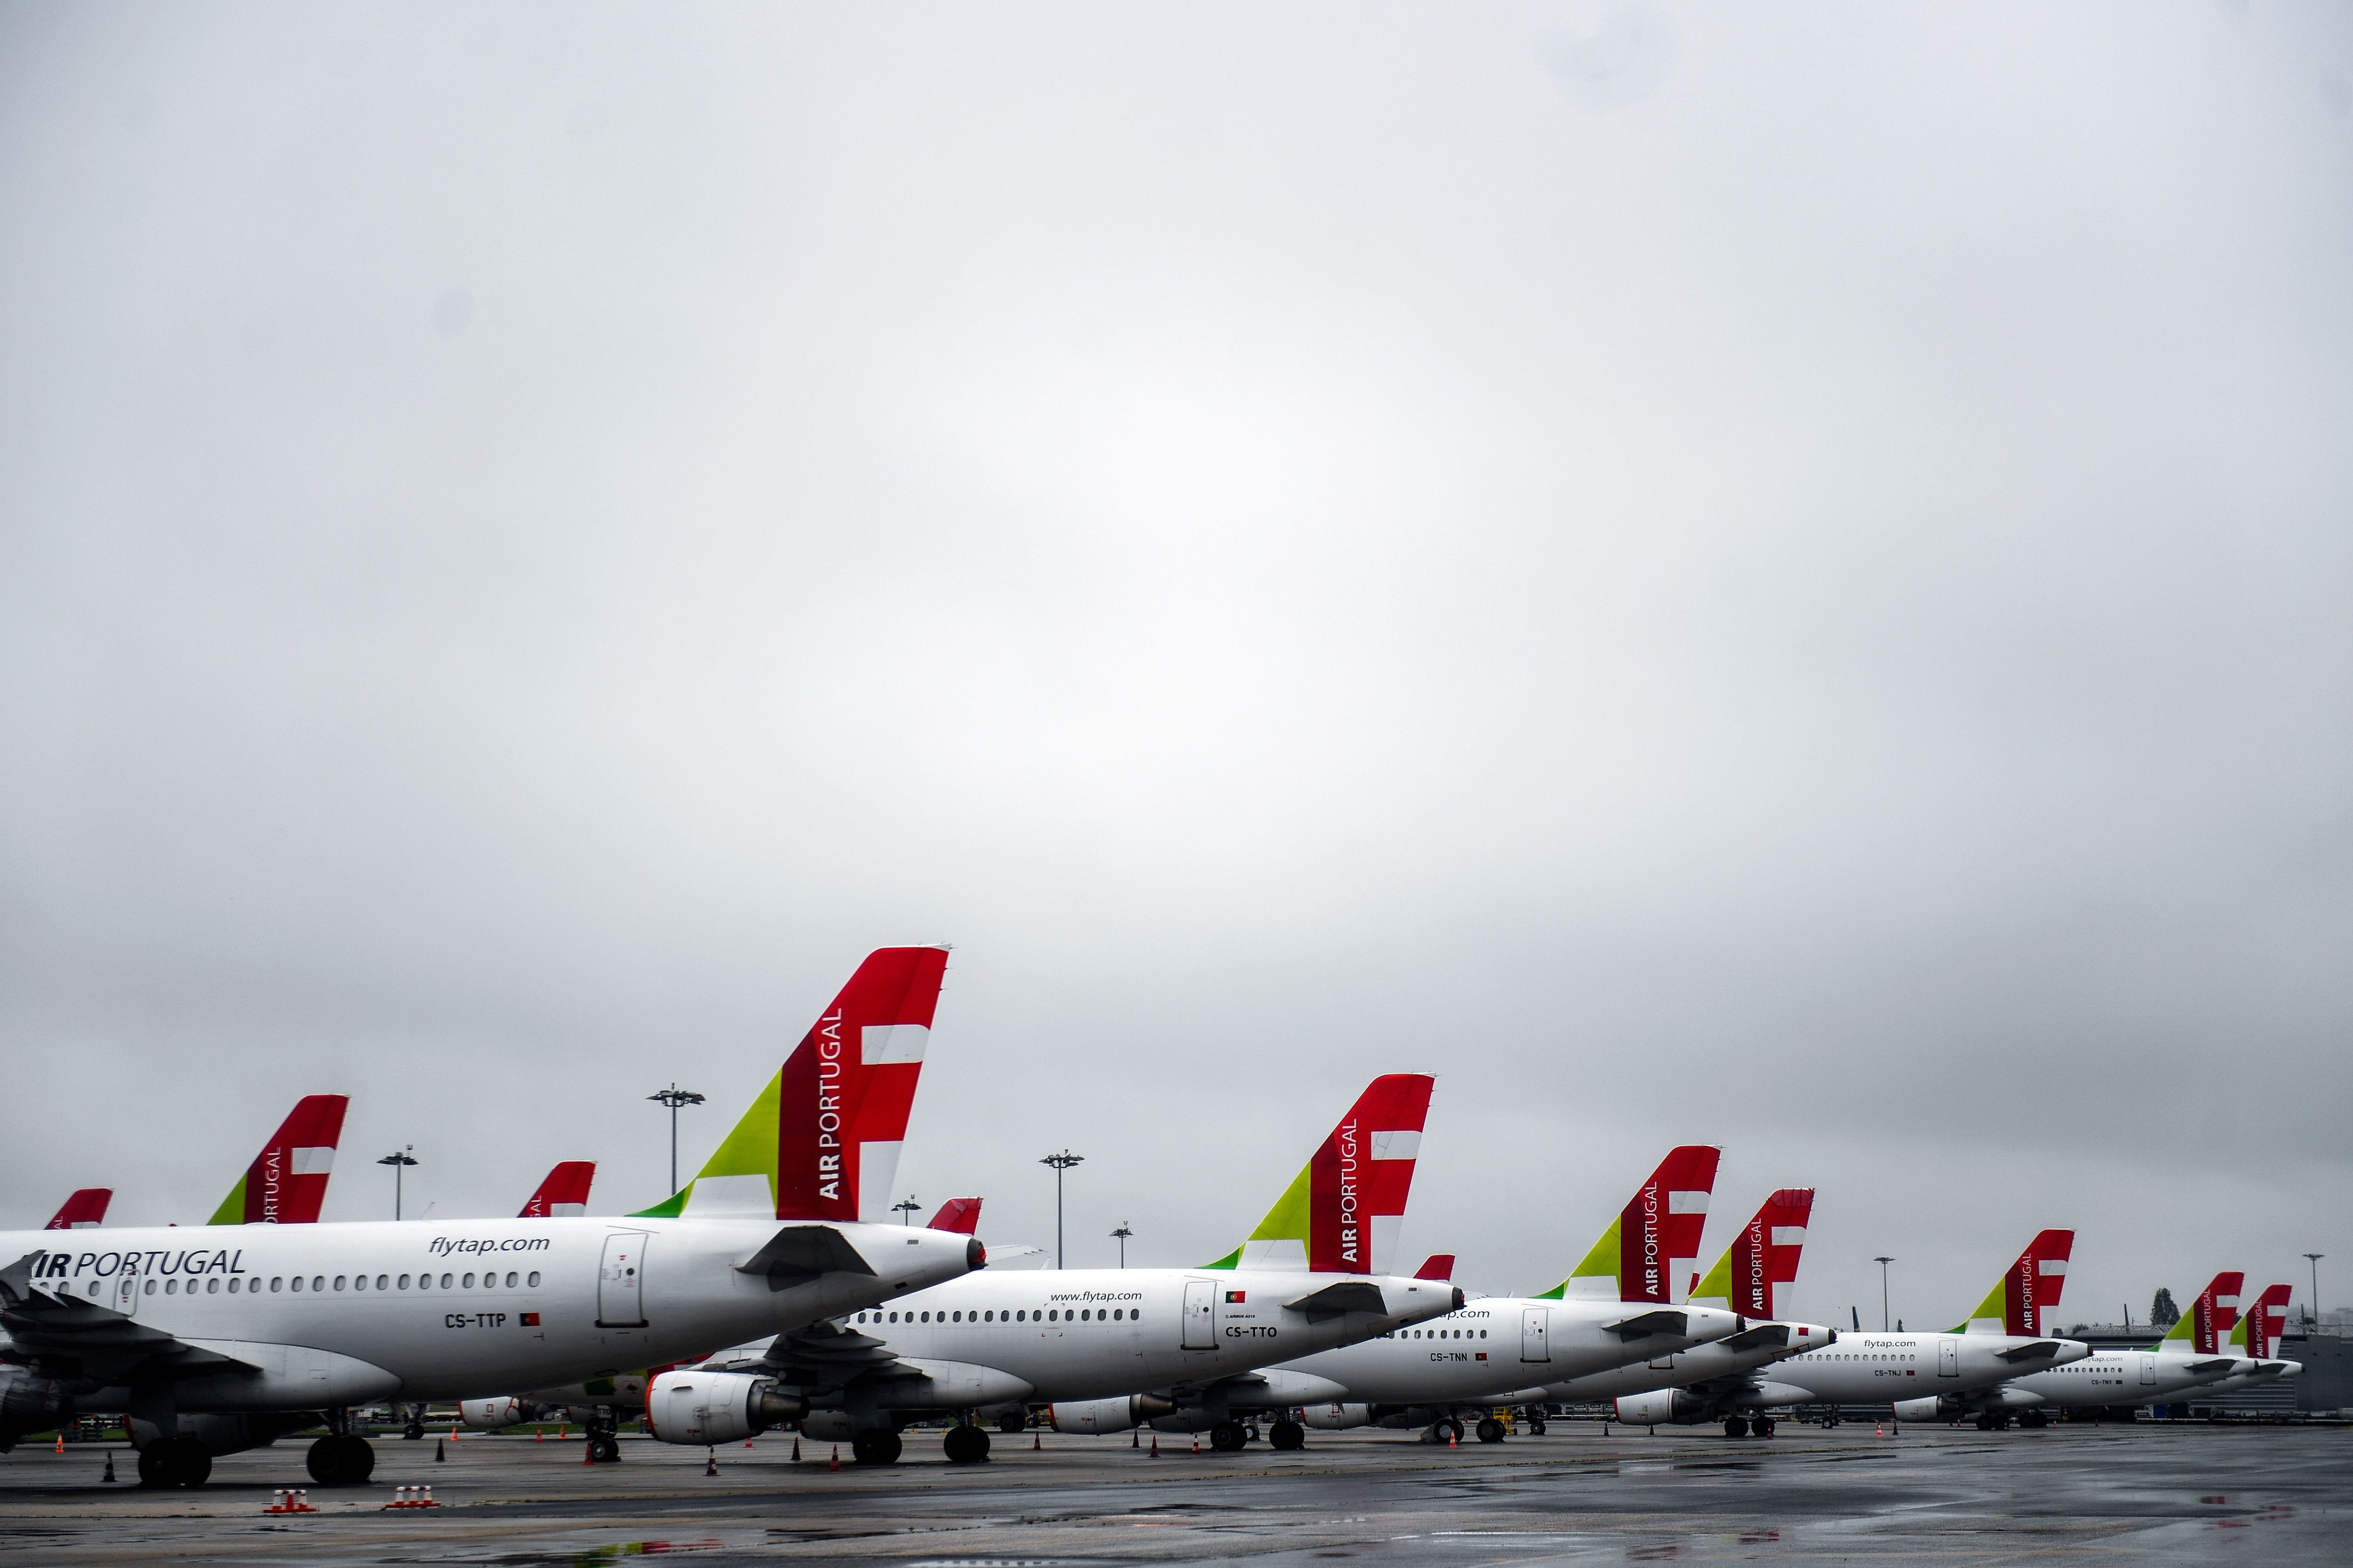 TAP airline planes on the tarmac of the Humberto Delgado airport in Lisbon on April 9, 2020. (Patricia de Melo Moreira—AFP/Getty Images)